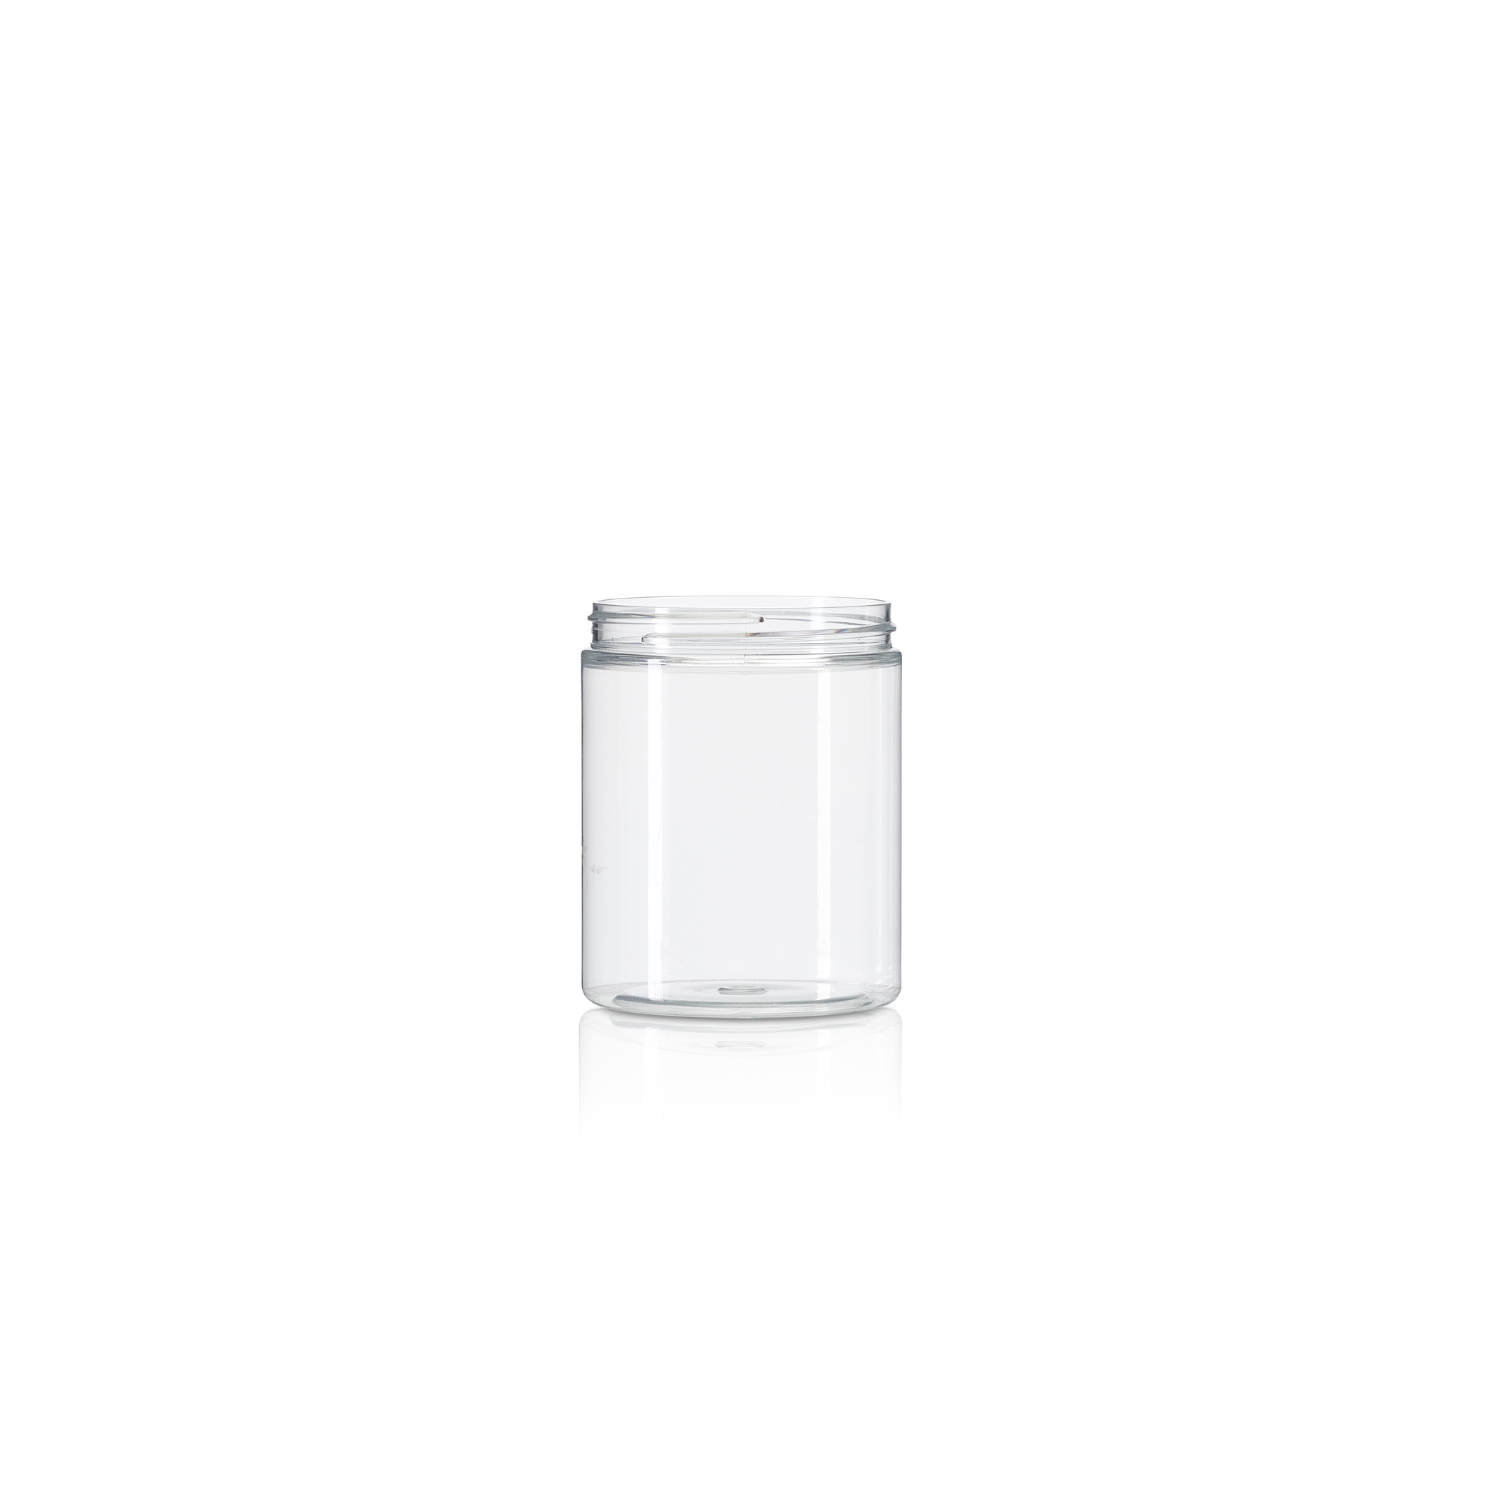 300ml Clear PET Straight-Sided Jar - 70/400 neck